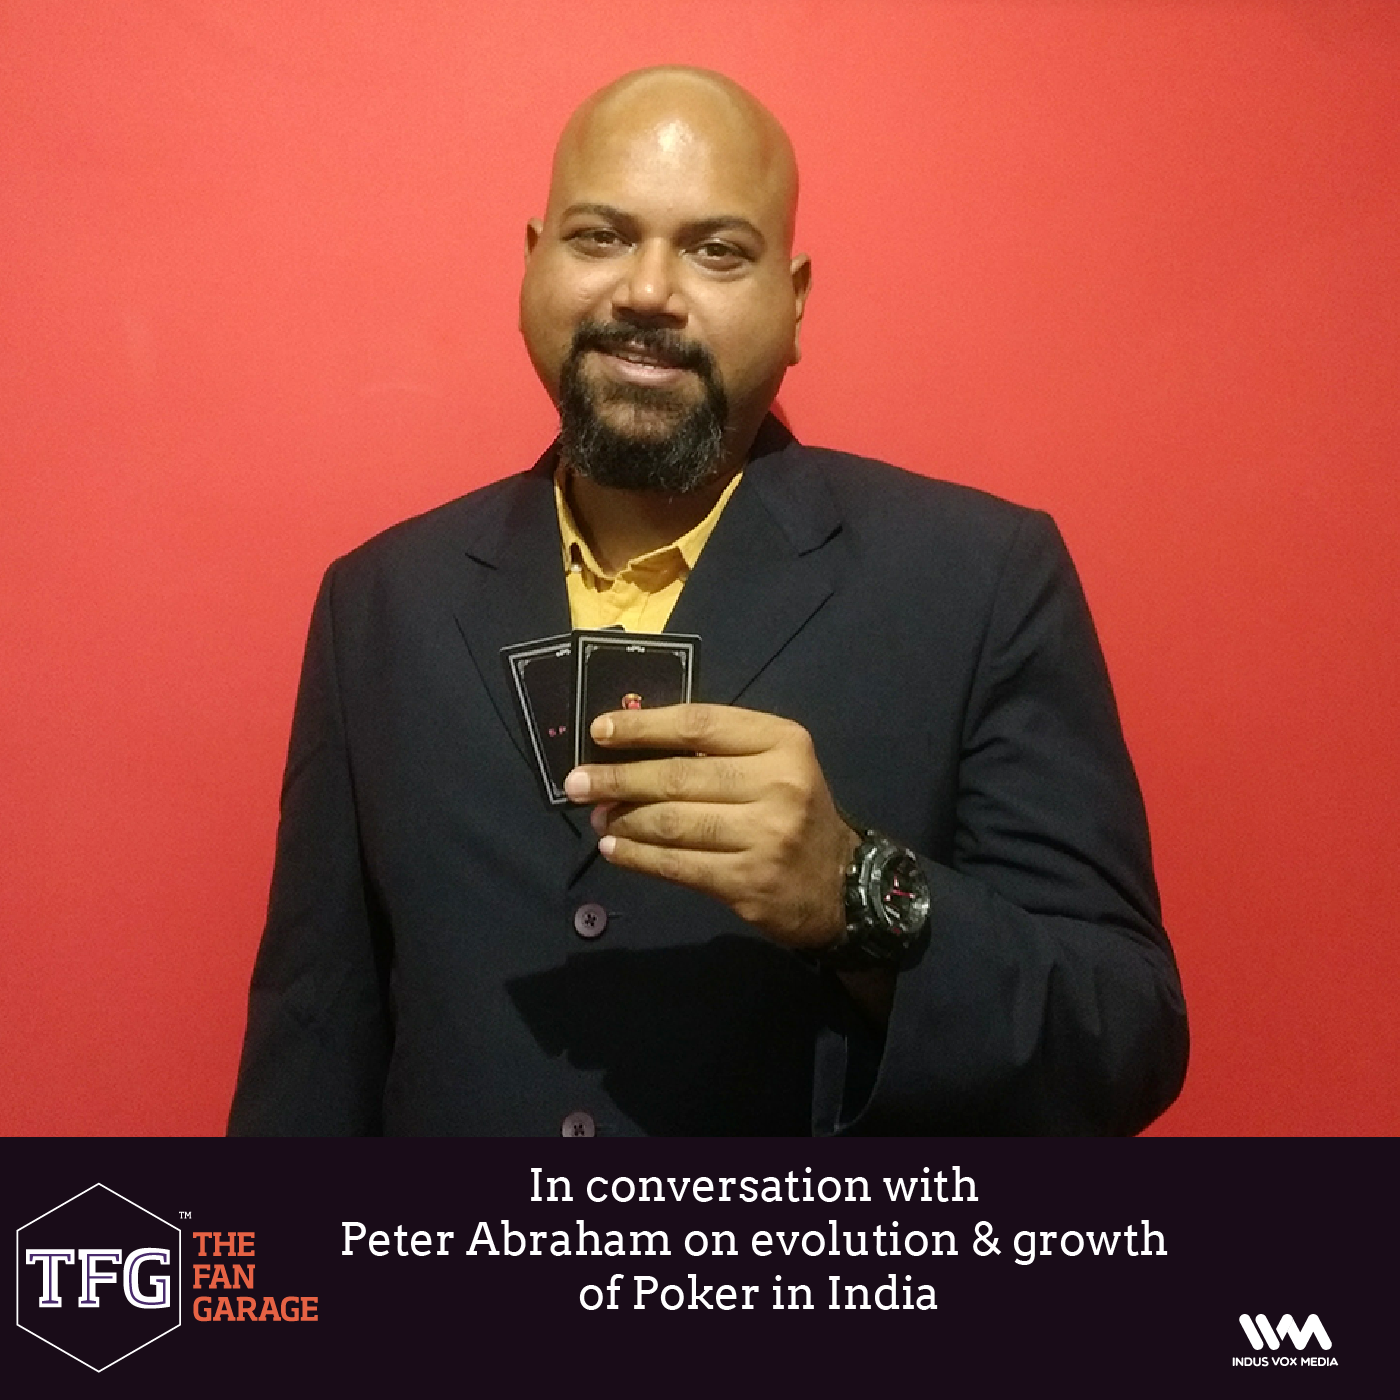 TFG interviews Ep. 036: In conversation with Peter Abraham on evolution & growth of Poker in India